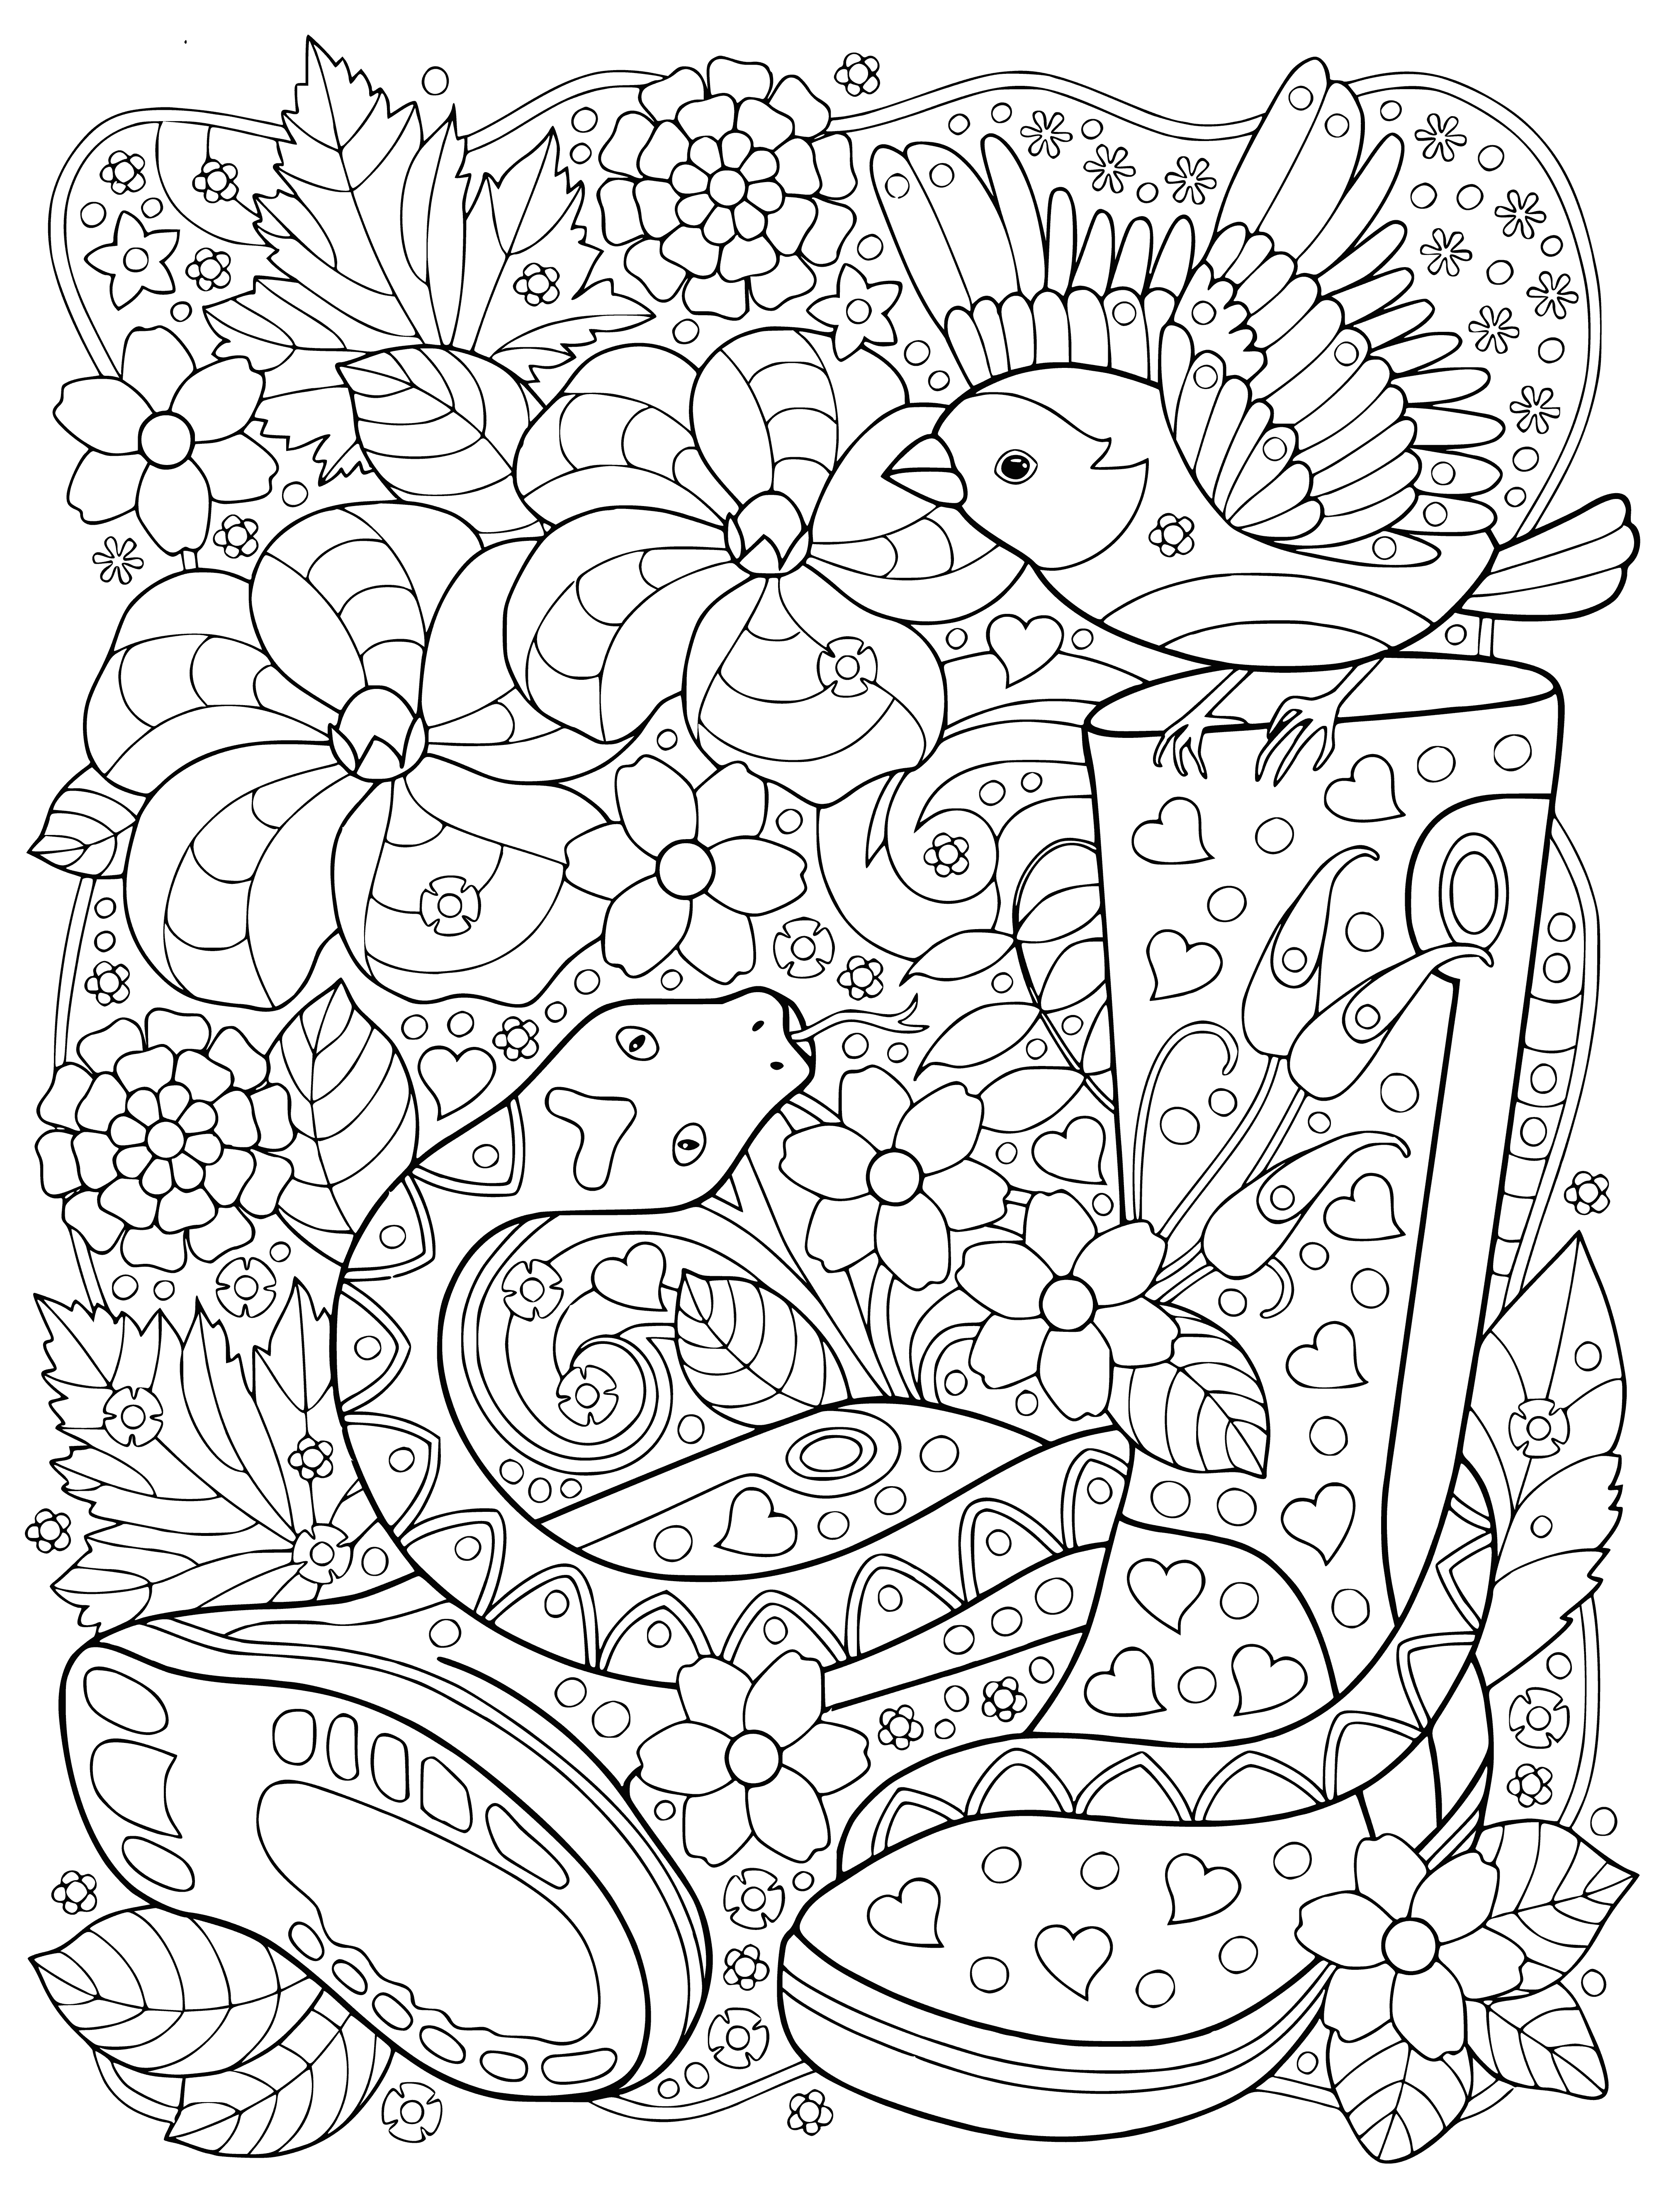 coloring page: Bird w/ long beak surrounded by coiled snake on branch w/ leaves in coloring page.